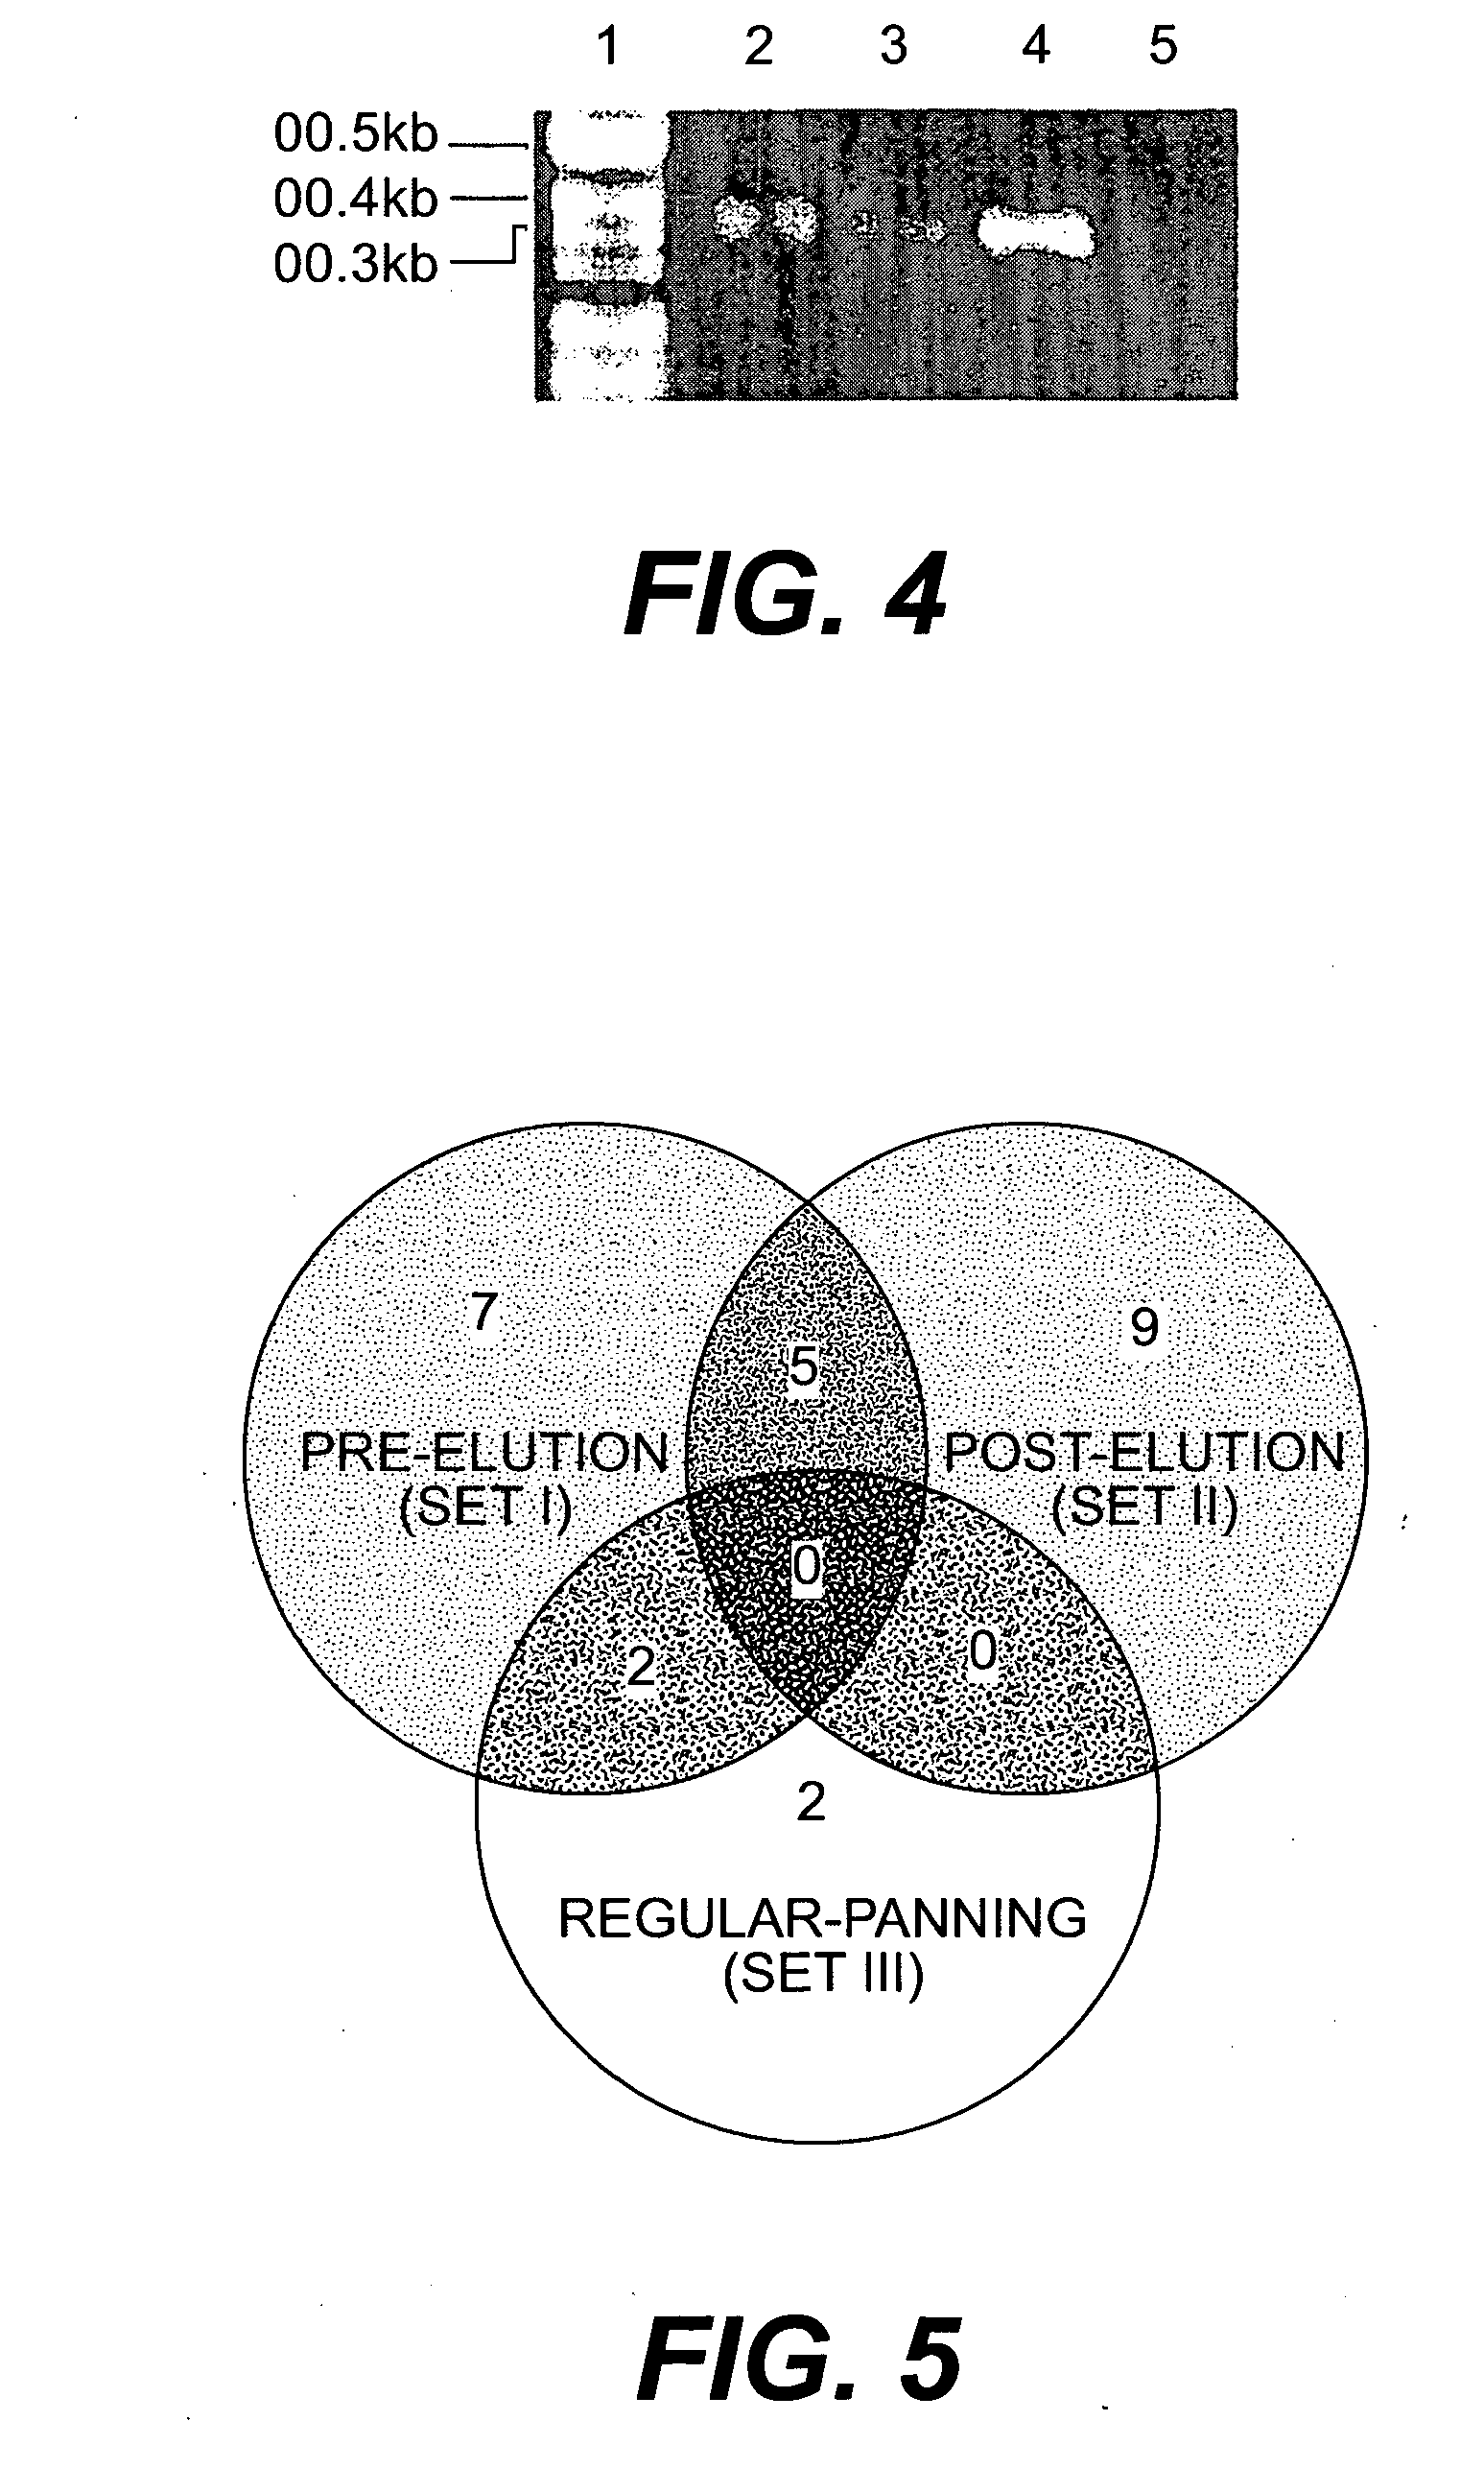 Peptide templates for nanoparticle synthesis obtained through PCR-driven phage display method